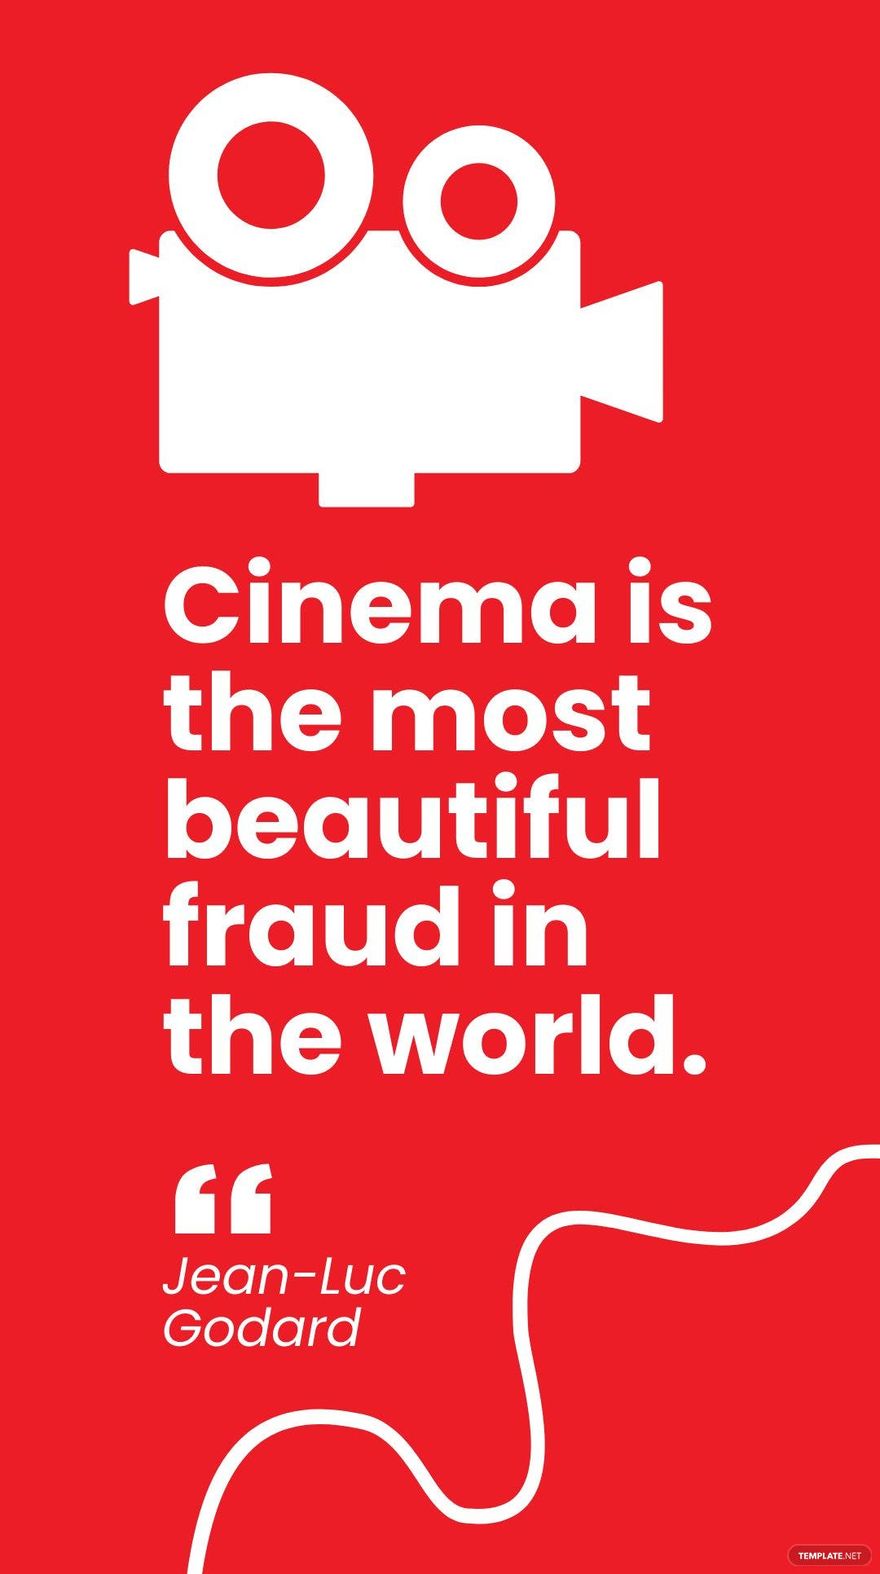 Jean-Luc Godard - Cinema is the most beautiful fraud in the world.